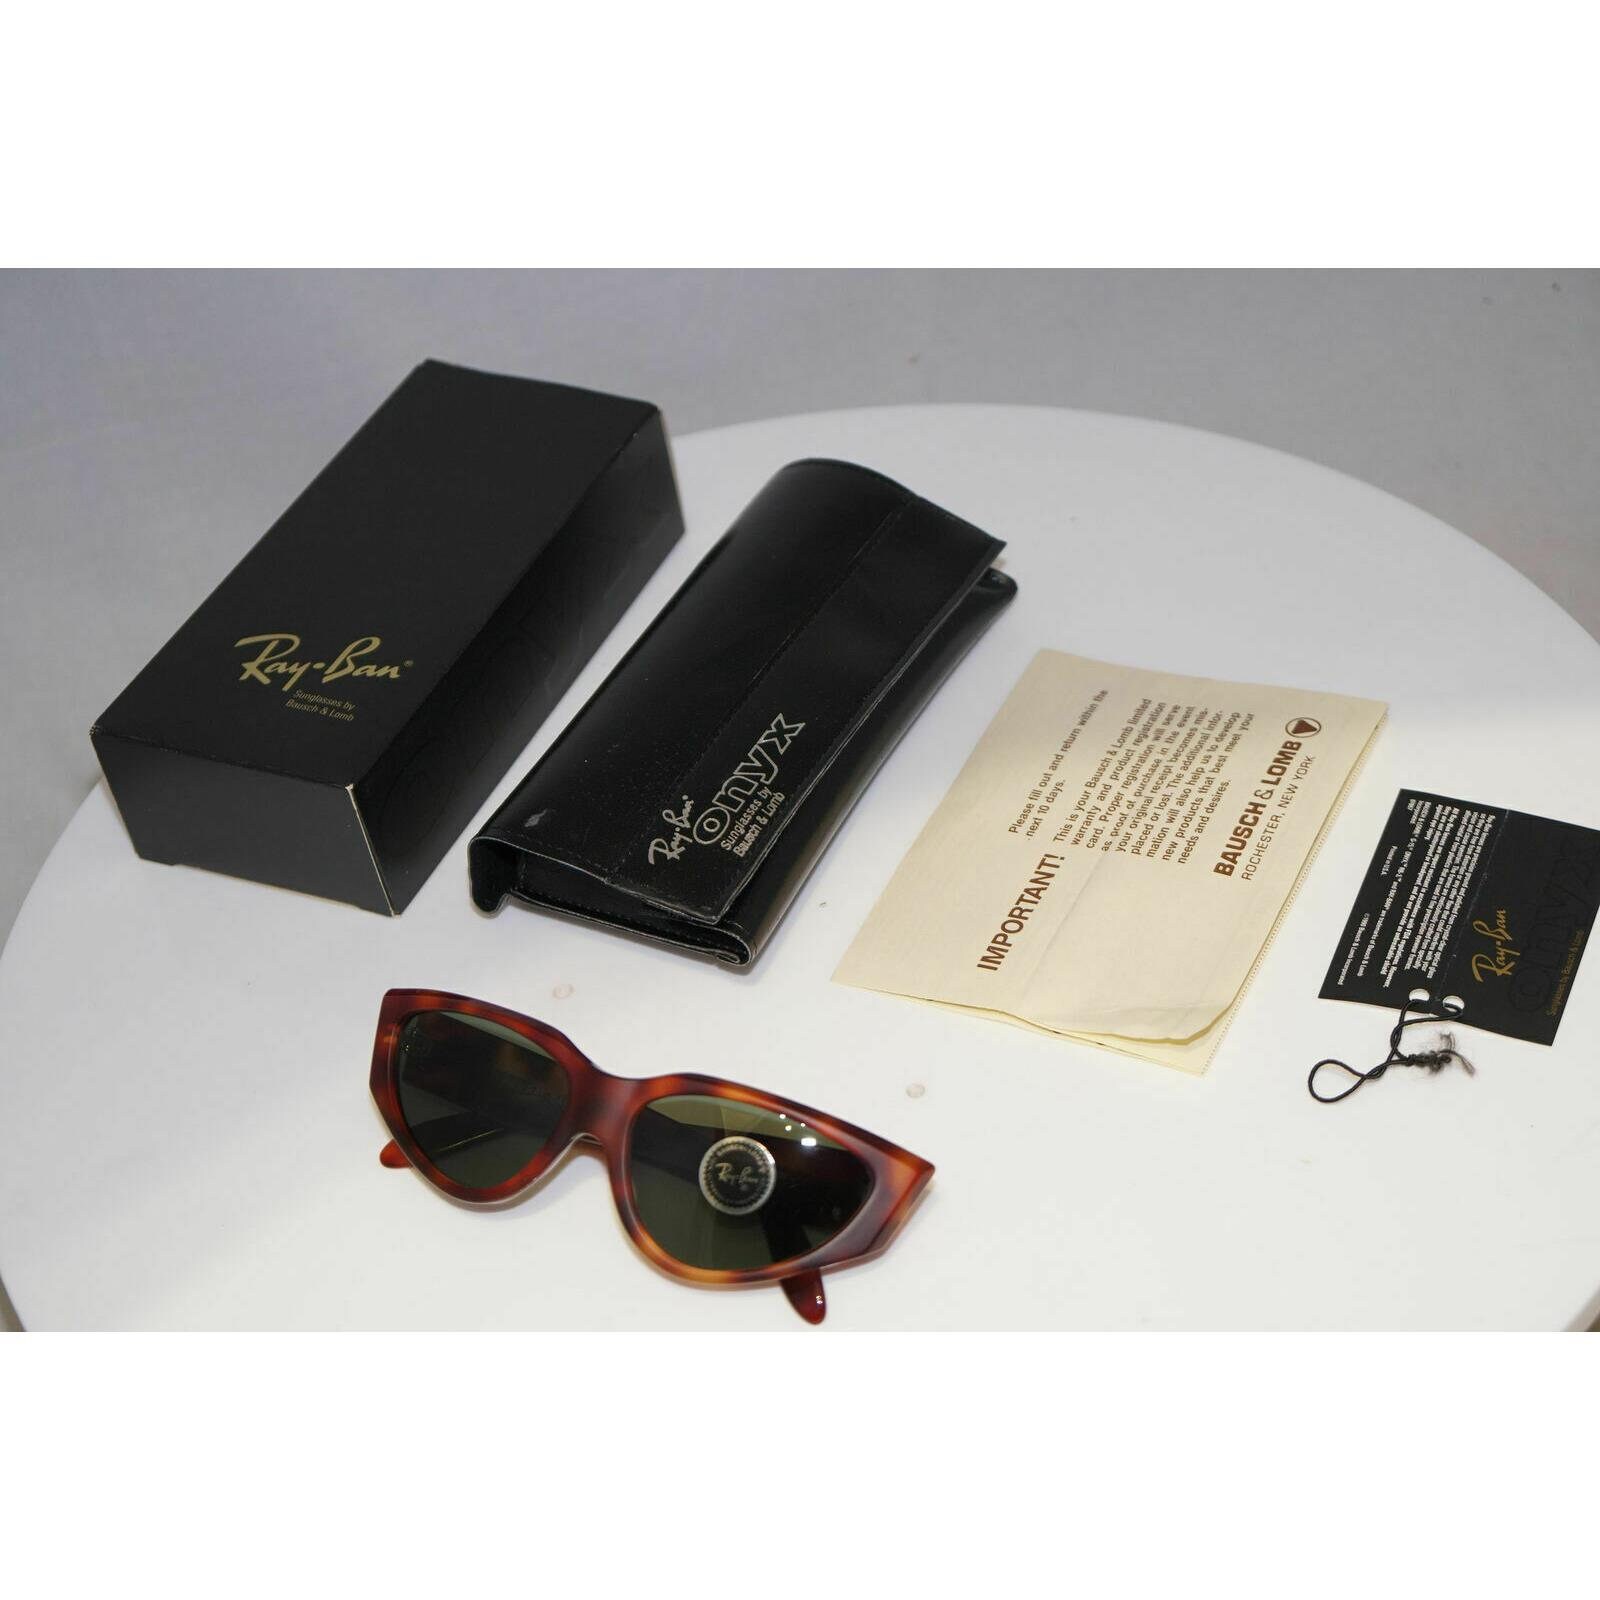 CHANEL Sunglasses for sale in Rochester, New York